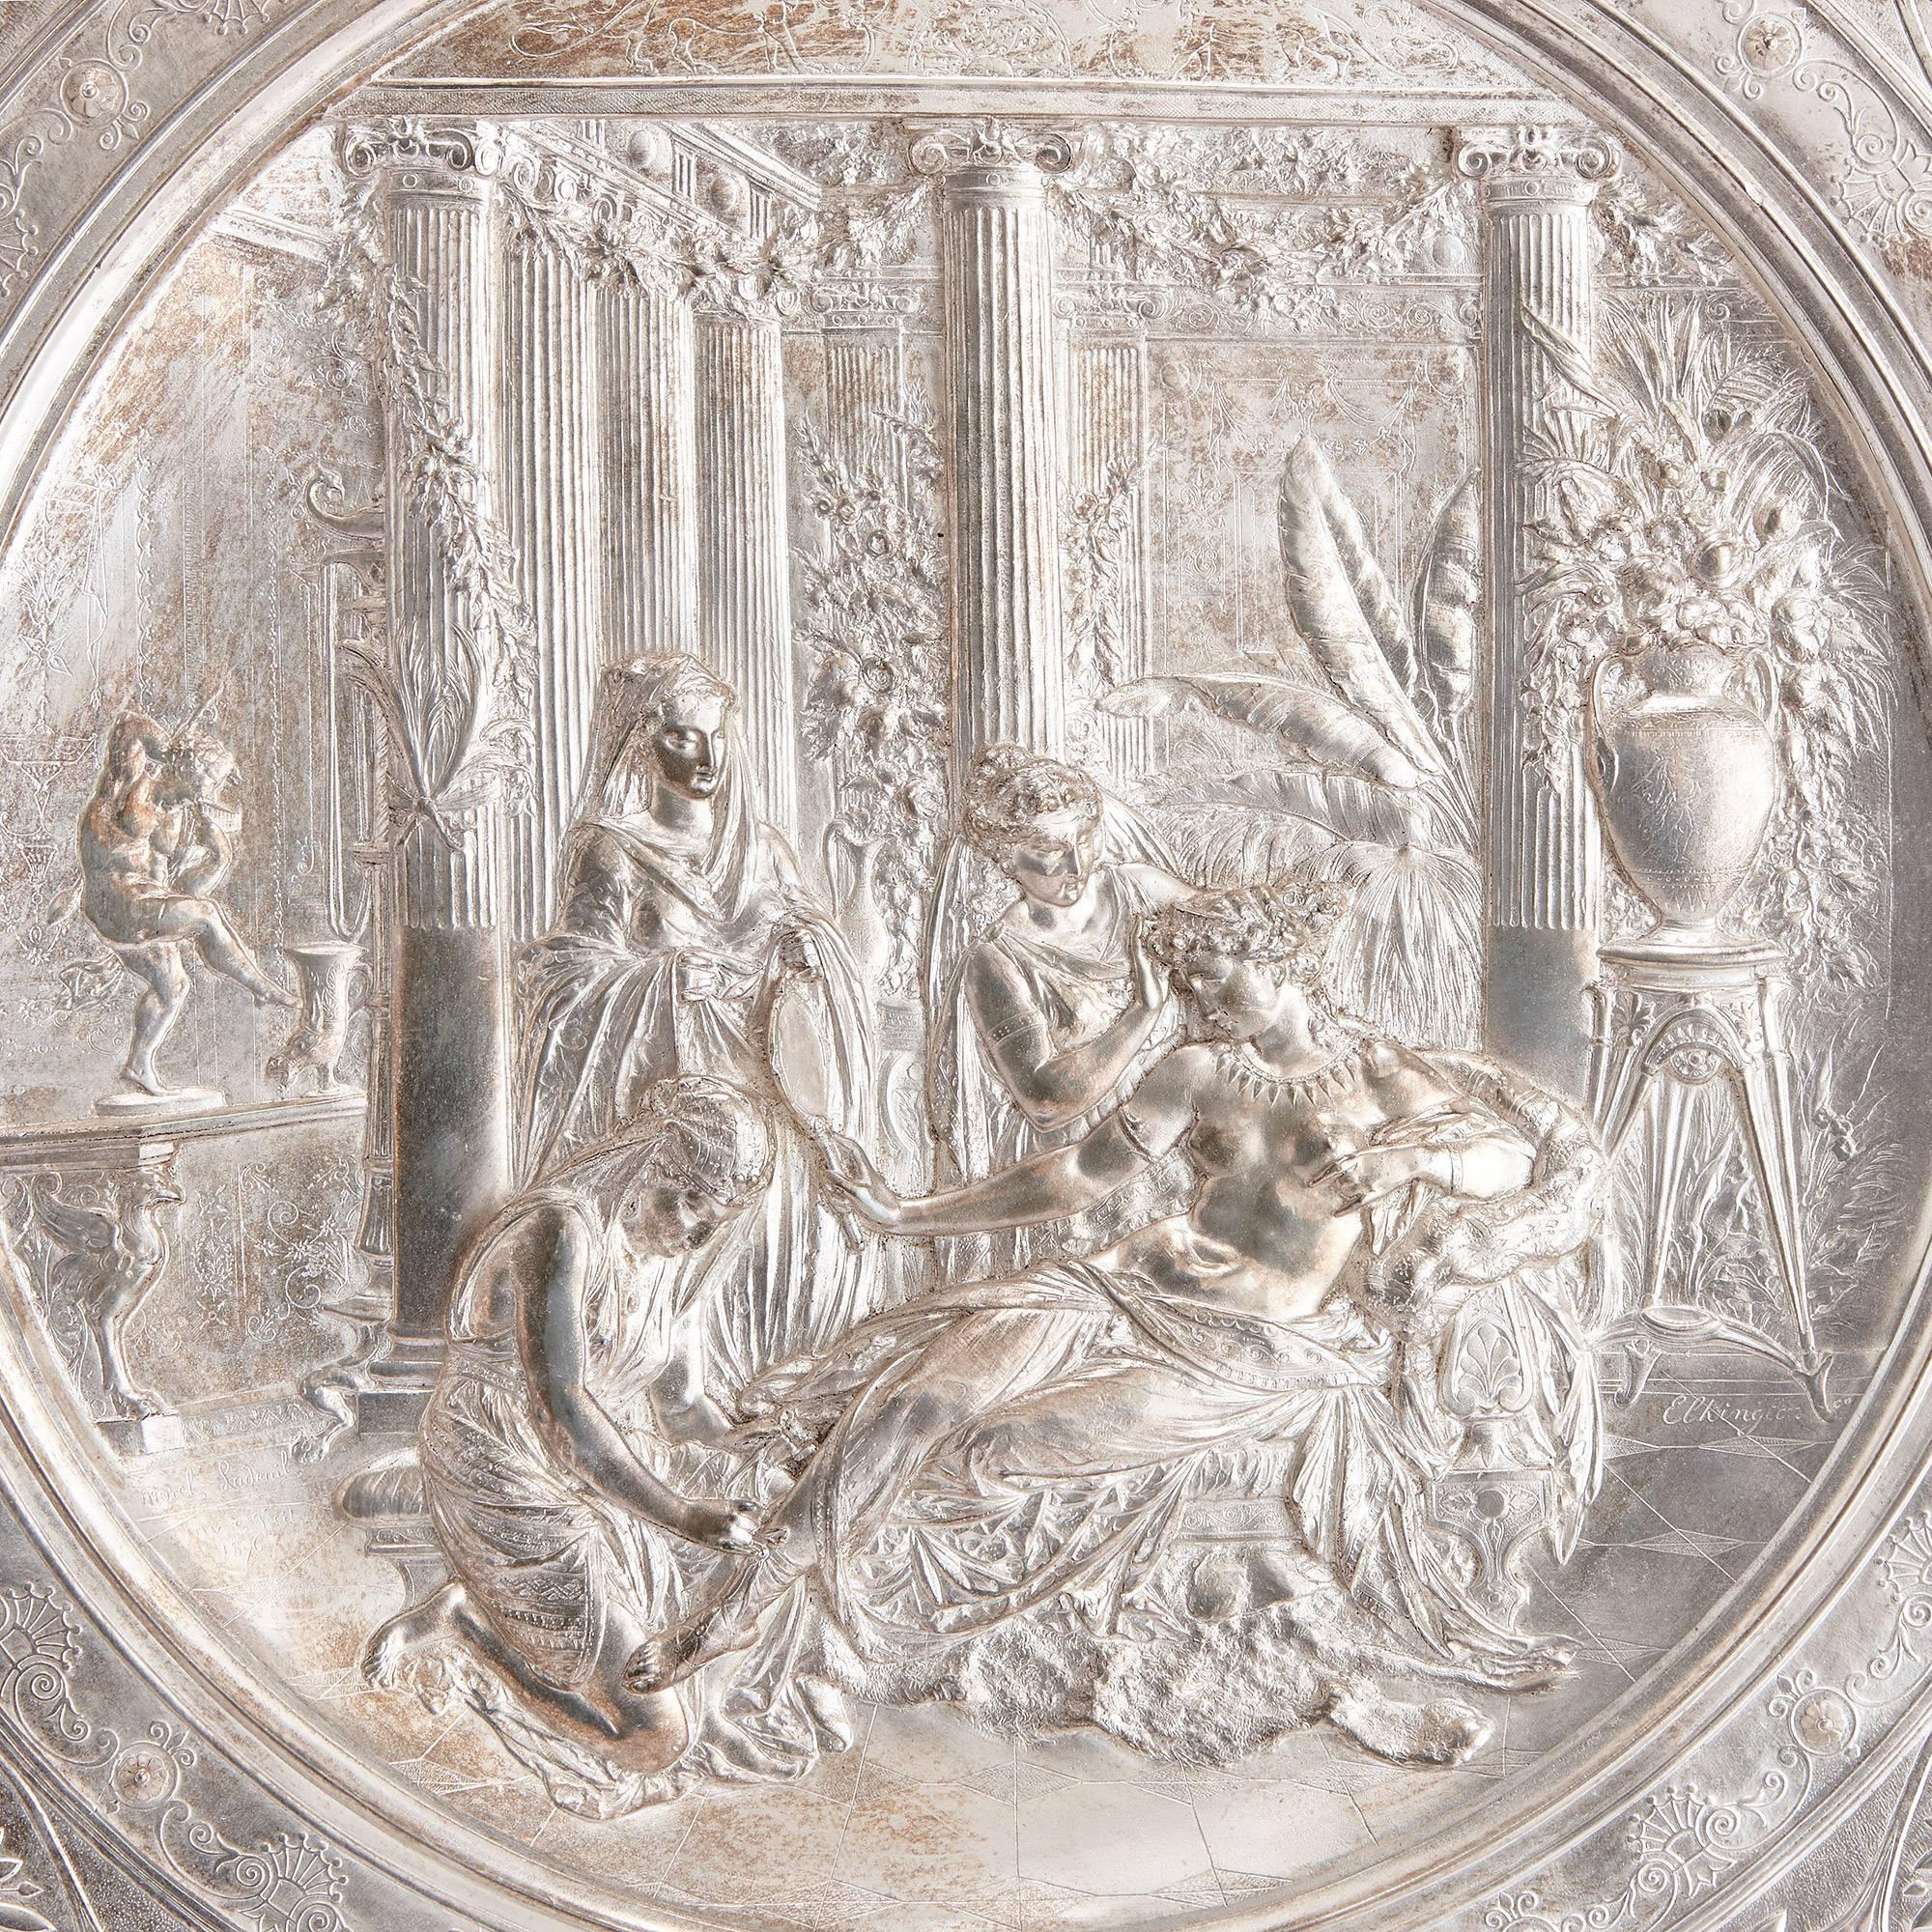 The silver charger mounted on a velvet board, of circular form in the Neo-Grec manner, depicting a classical figural scene of a semi-clad maiden surrounded by three female attendants with an exotic colonnaded interior, within a florally decorated